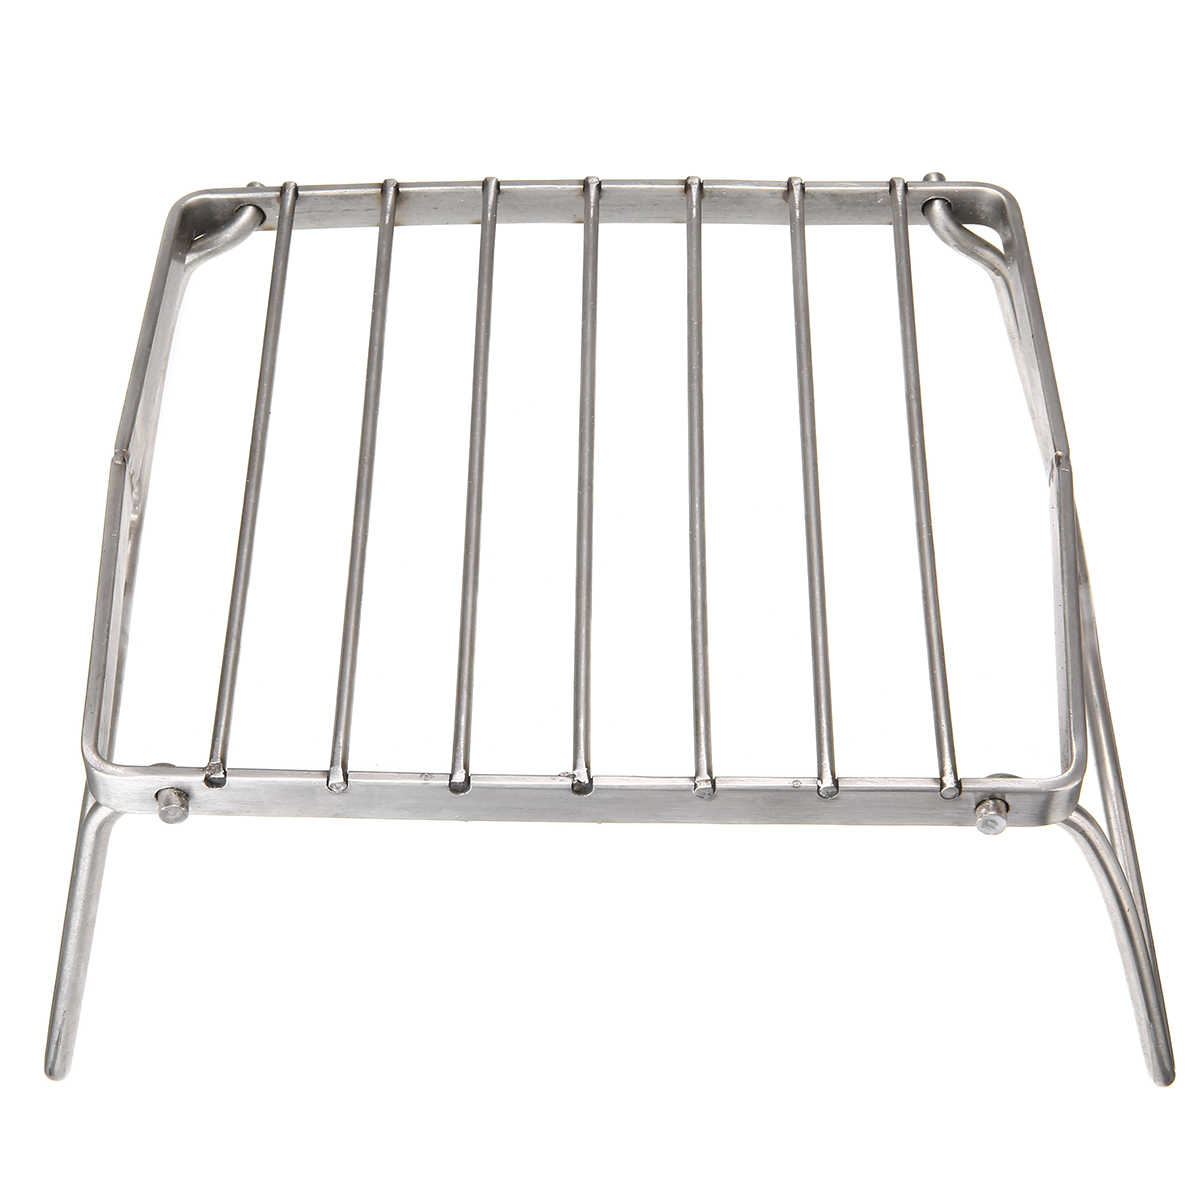 Stainless-Steel-BBQ-Stand-Portable-Barbecue-Rack-Charcoal-Camping-Grill-Foldable-Outdoor-Cooking-Stands.jpg_q50.jpg